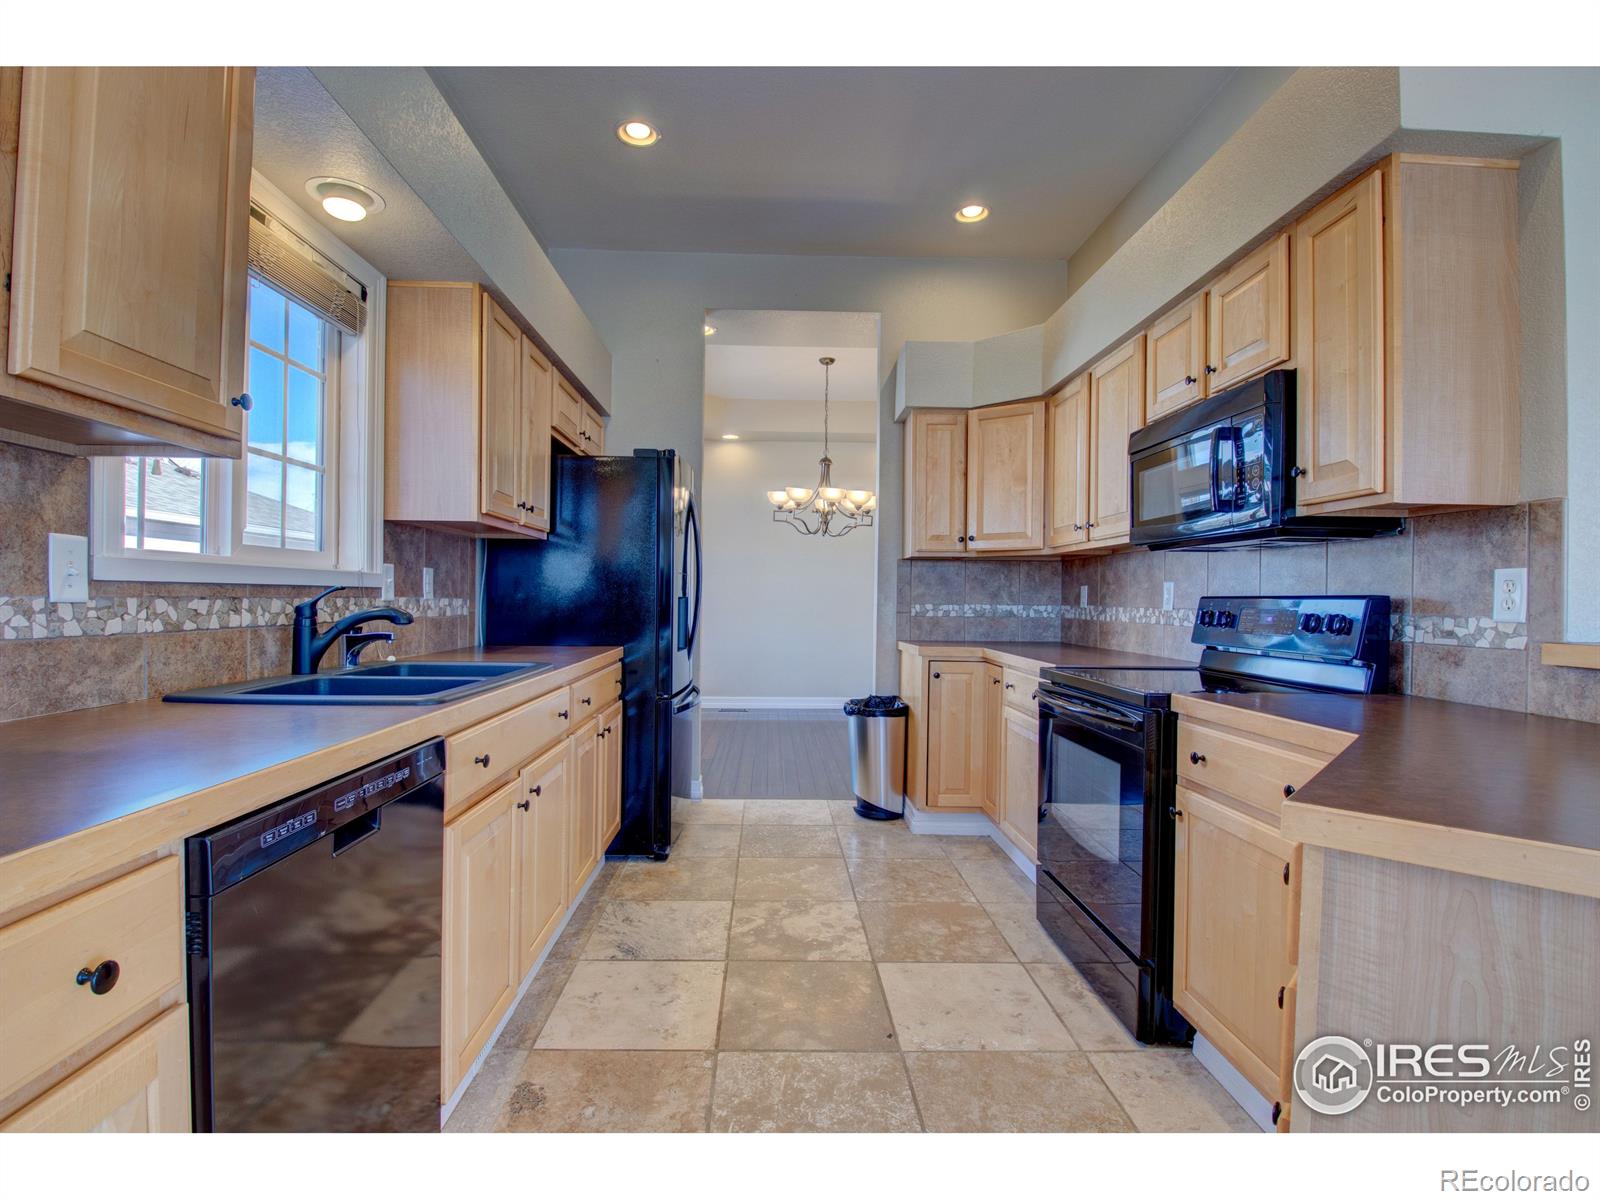 513 54th, Greeley, CO